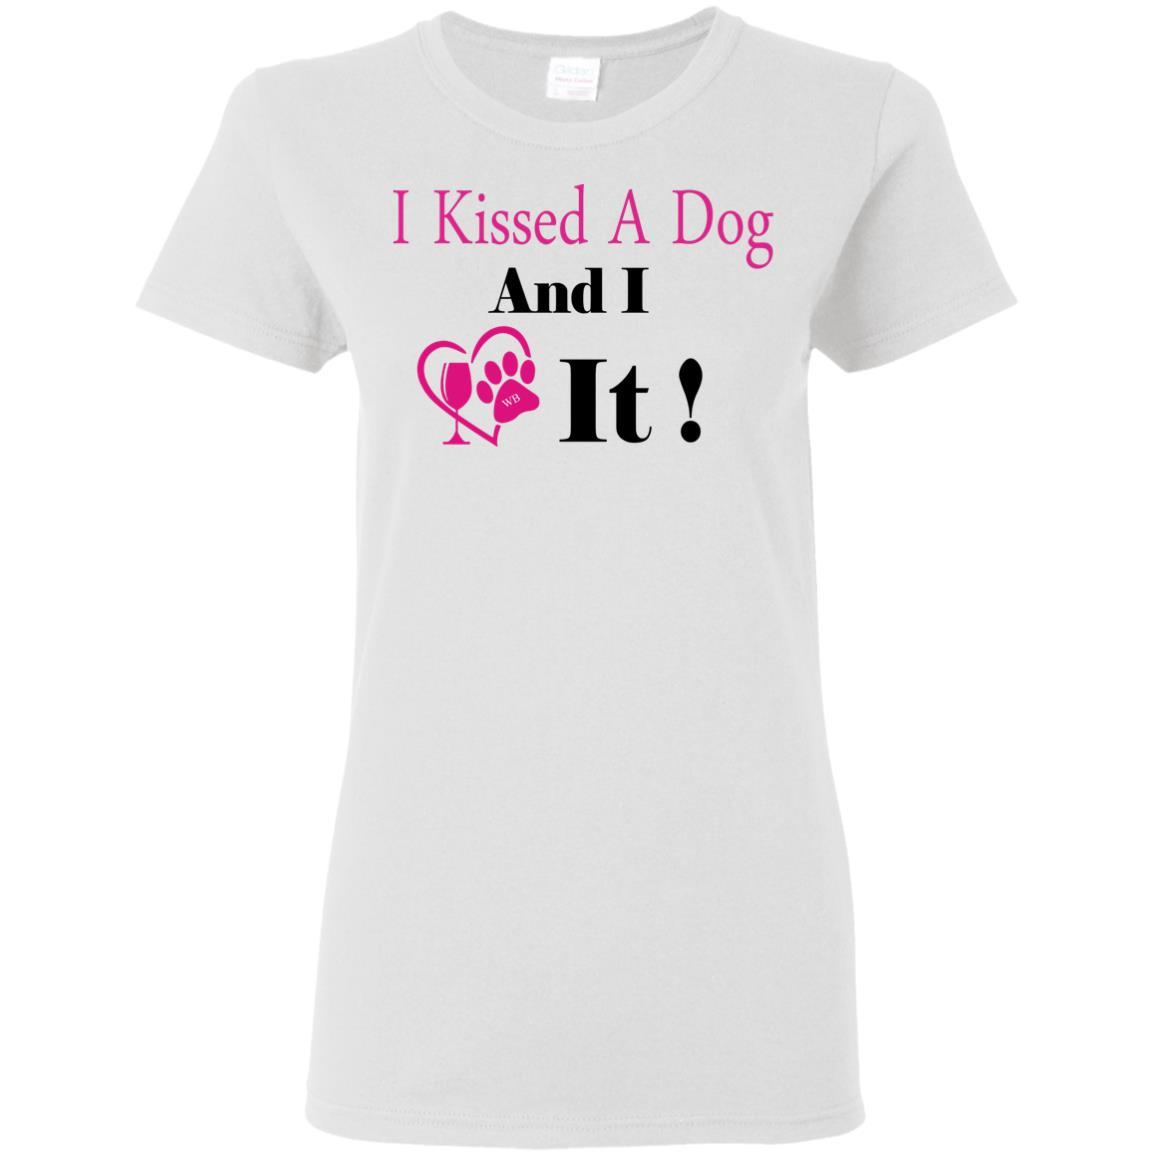 T-Shirts White / S WineyBitches.co "I Kissed A Dog And I Loved It:" Ladies' 5.3 oz. T-Shirt WineyBitchesCo